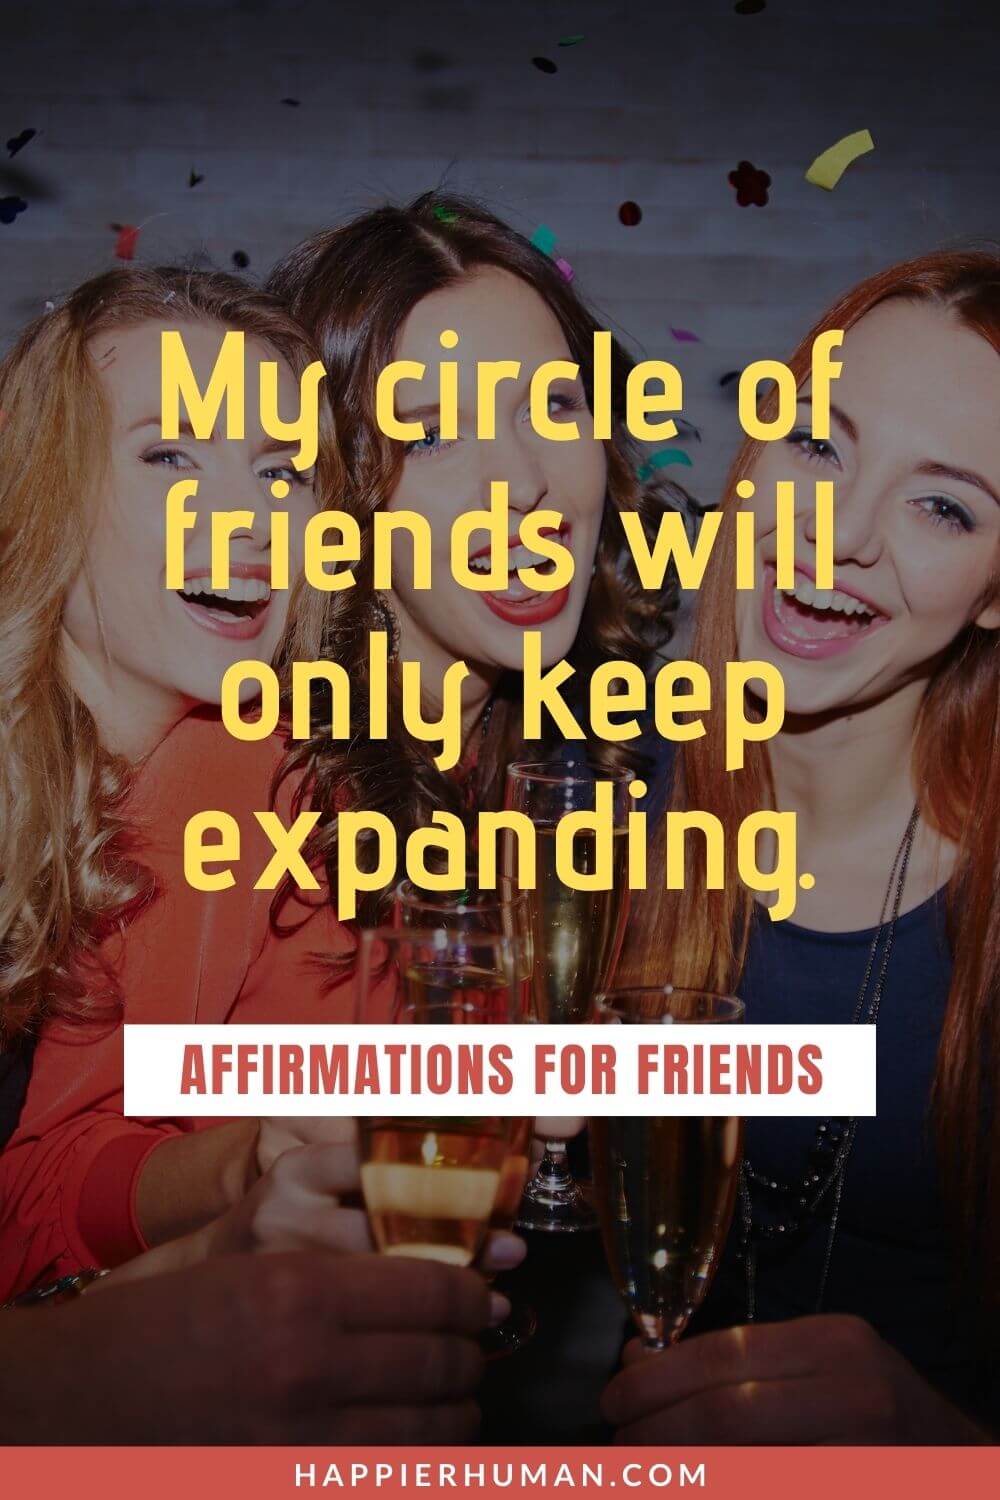 Affirmations for Friends - My circle of friends will only keep expanding. | nice affirmations for friends | affirmations for healing friendship | funny affirmations for friends